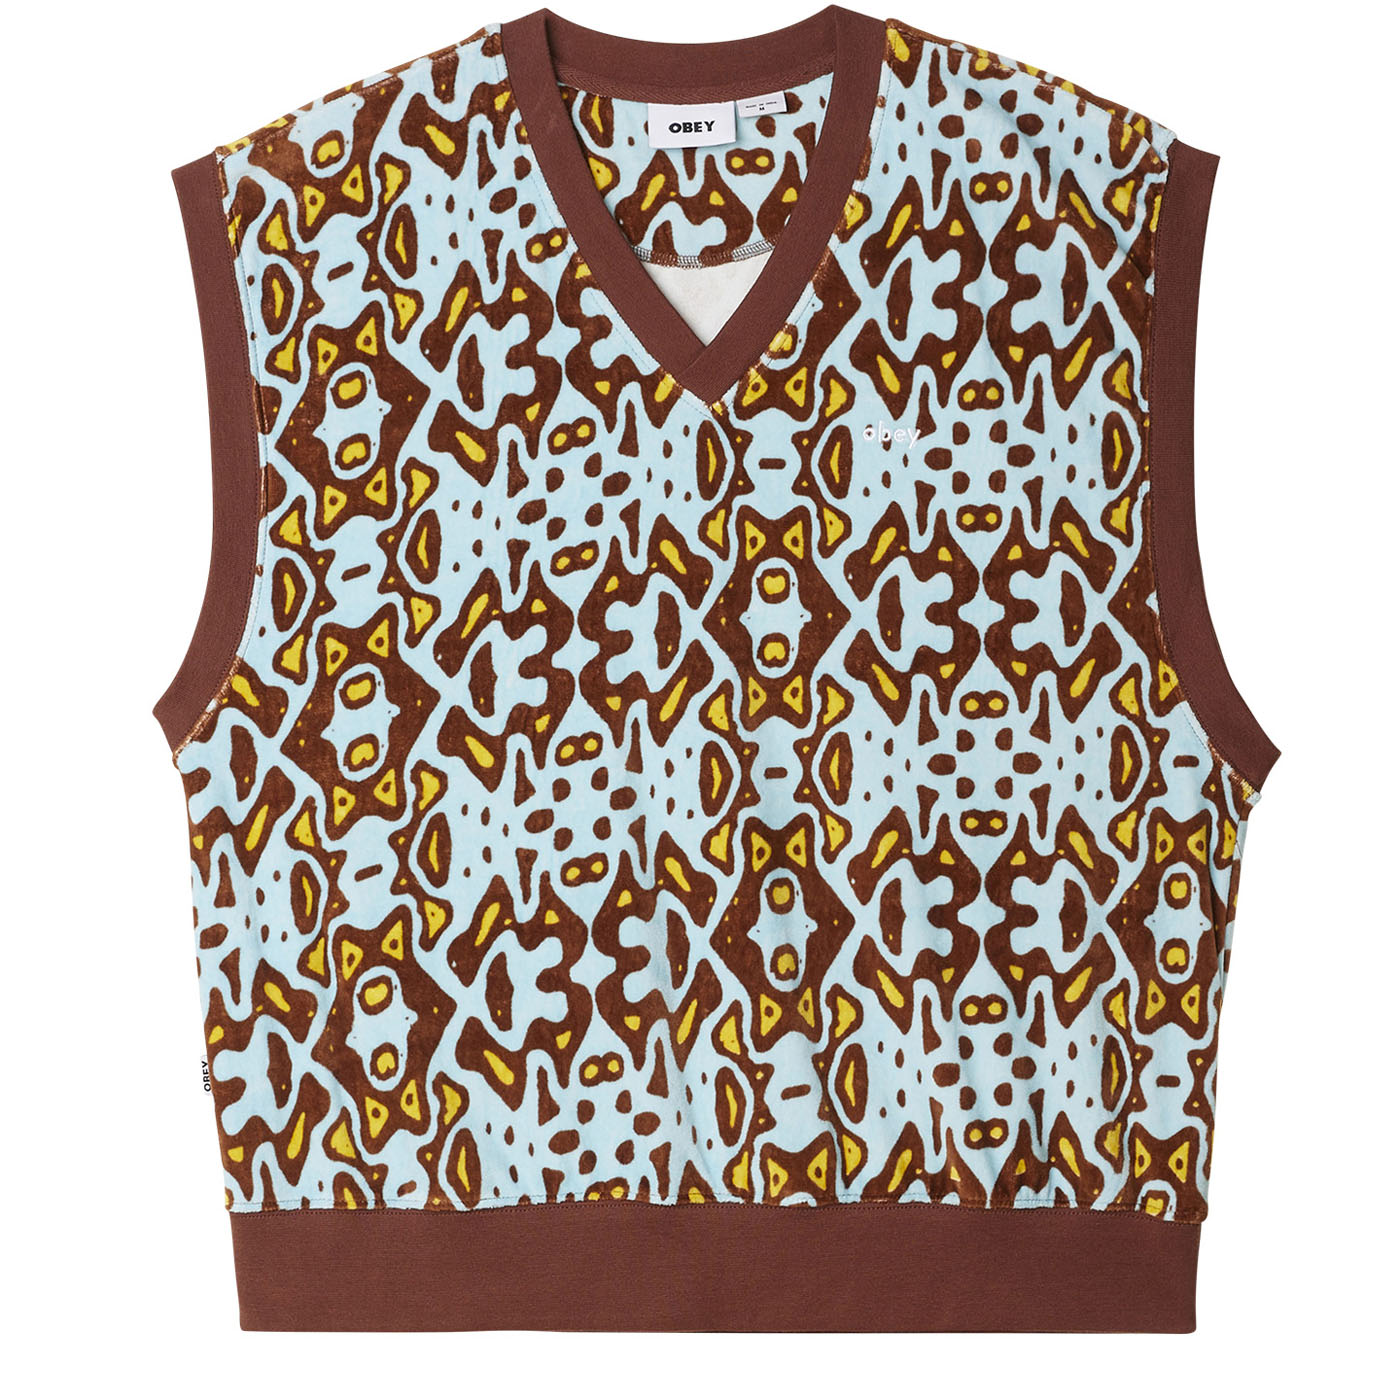 Knitwear Archives - Obey Clothing UK